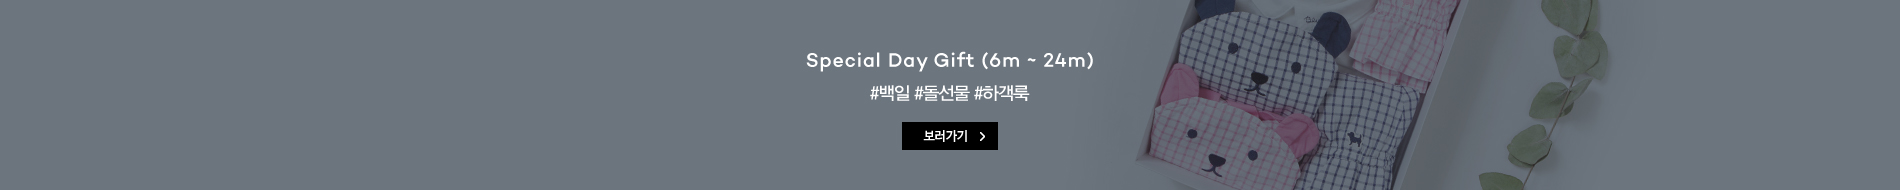 Special Day Gift (6m ~ 24m) #백일 #돌선물 #하객룩